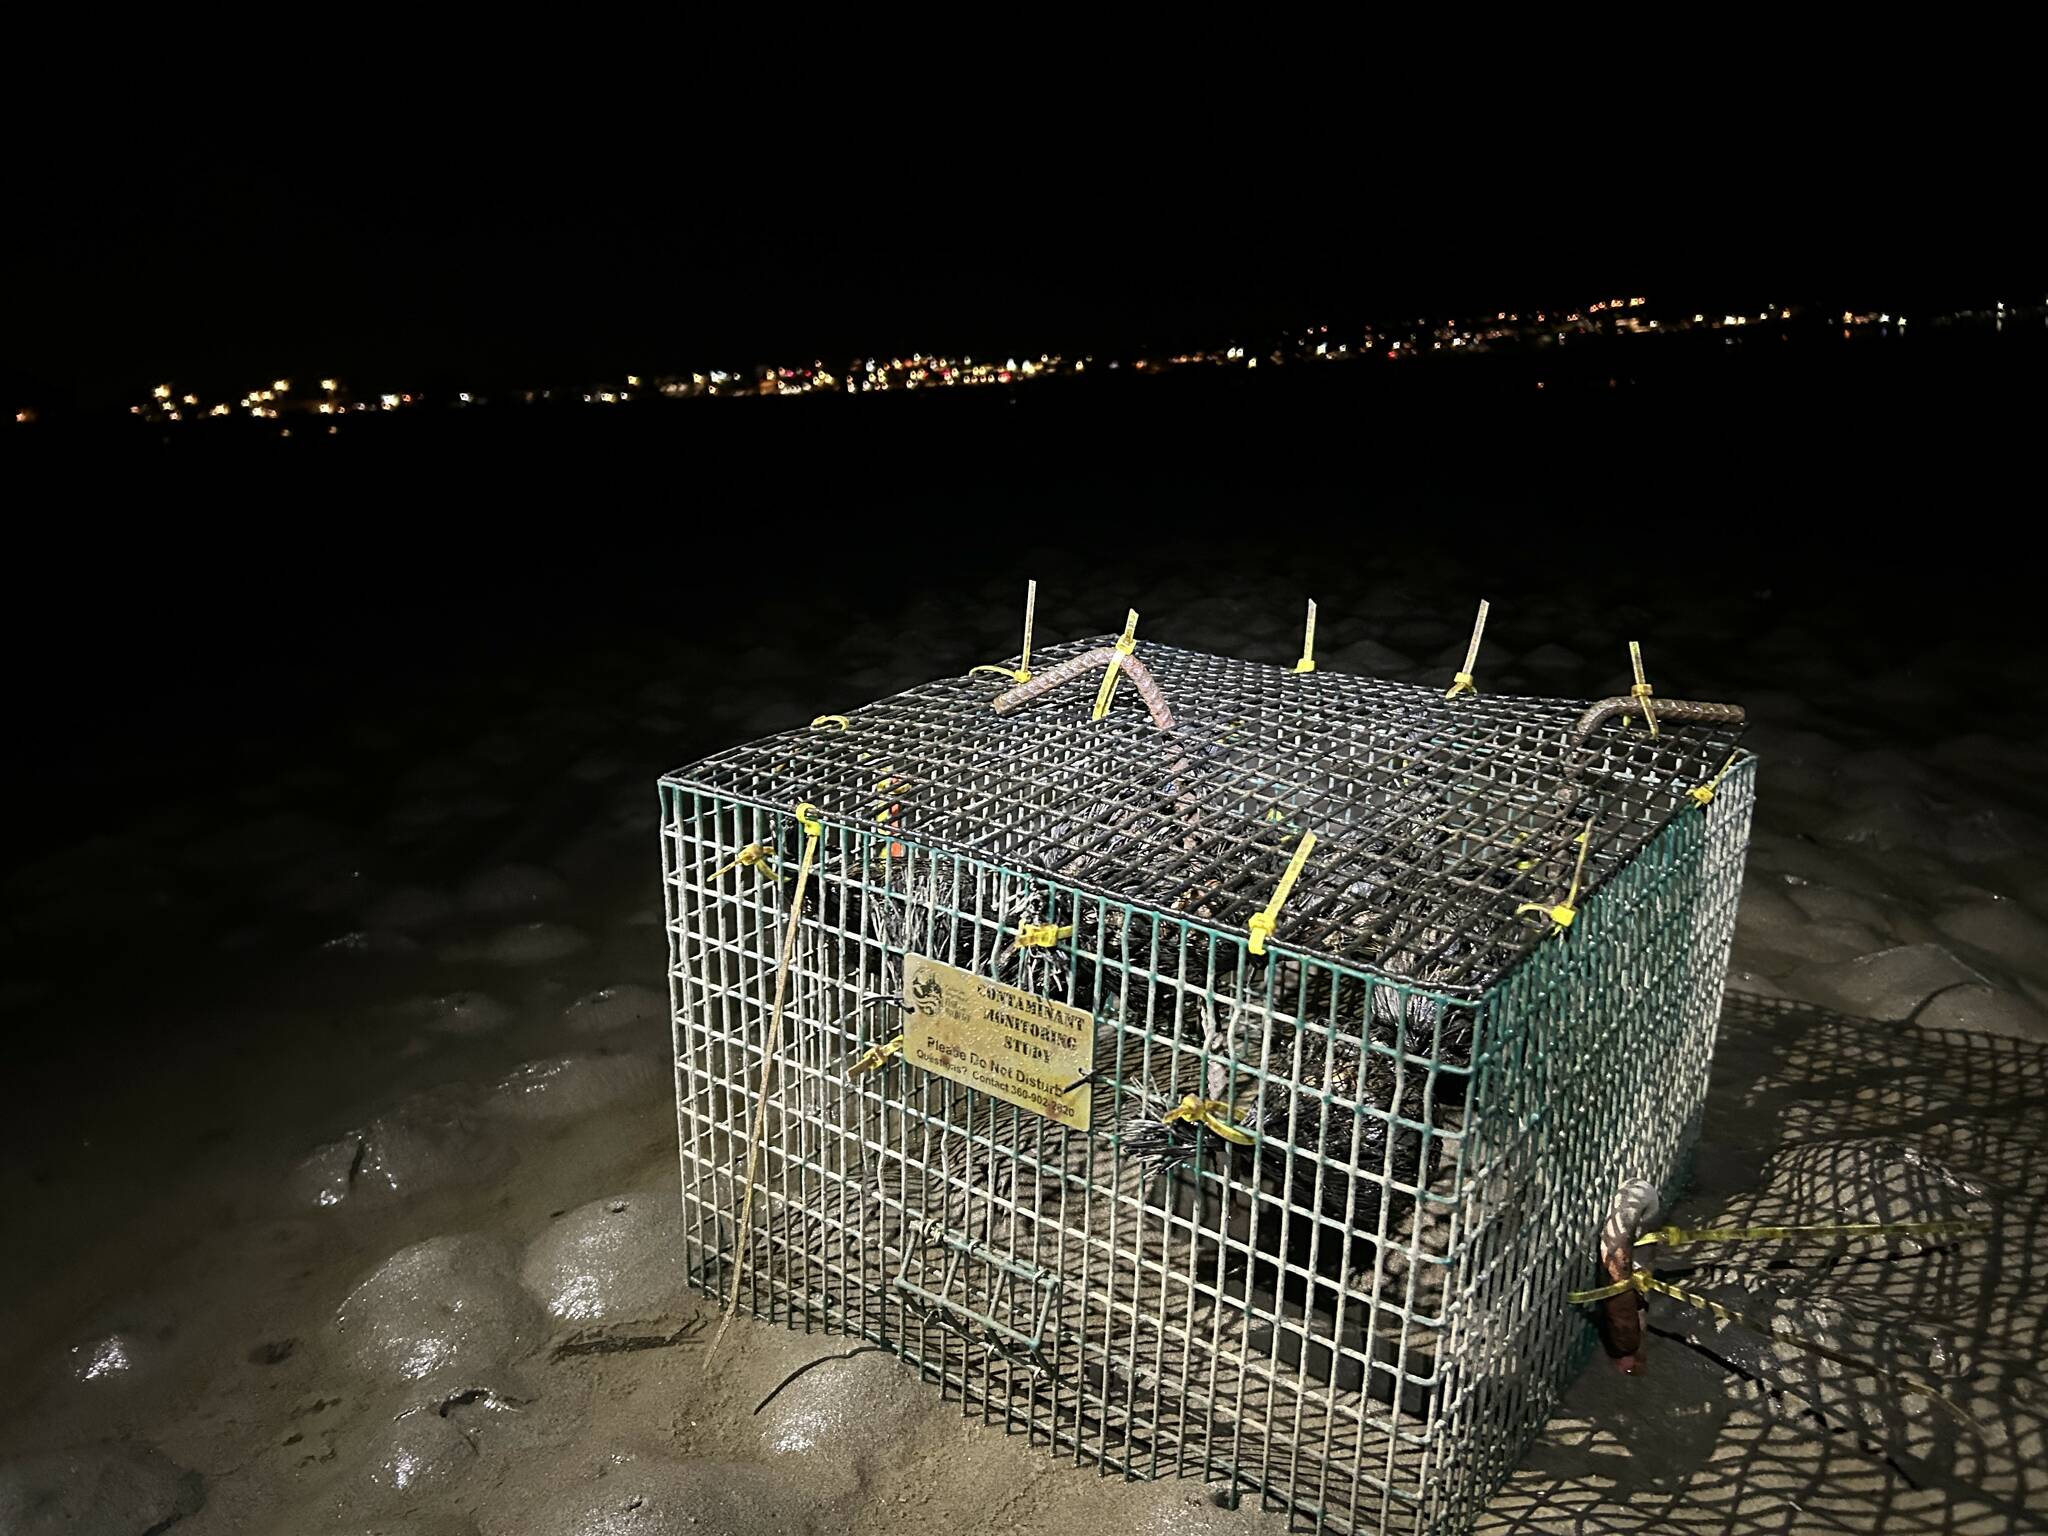 A mussel cage at Windjammer Park before being retrieved Thursday night. WDFW Biologist Danielle Nordstrom said retrieval efforts can happen in collaboration with the Navy, the National Centers for Coastal Ocean Science and volunteers from Soundwater Stewards. (Photo provided)